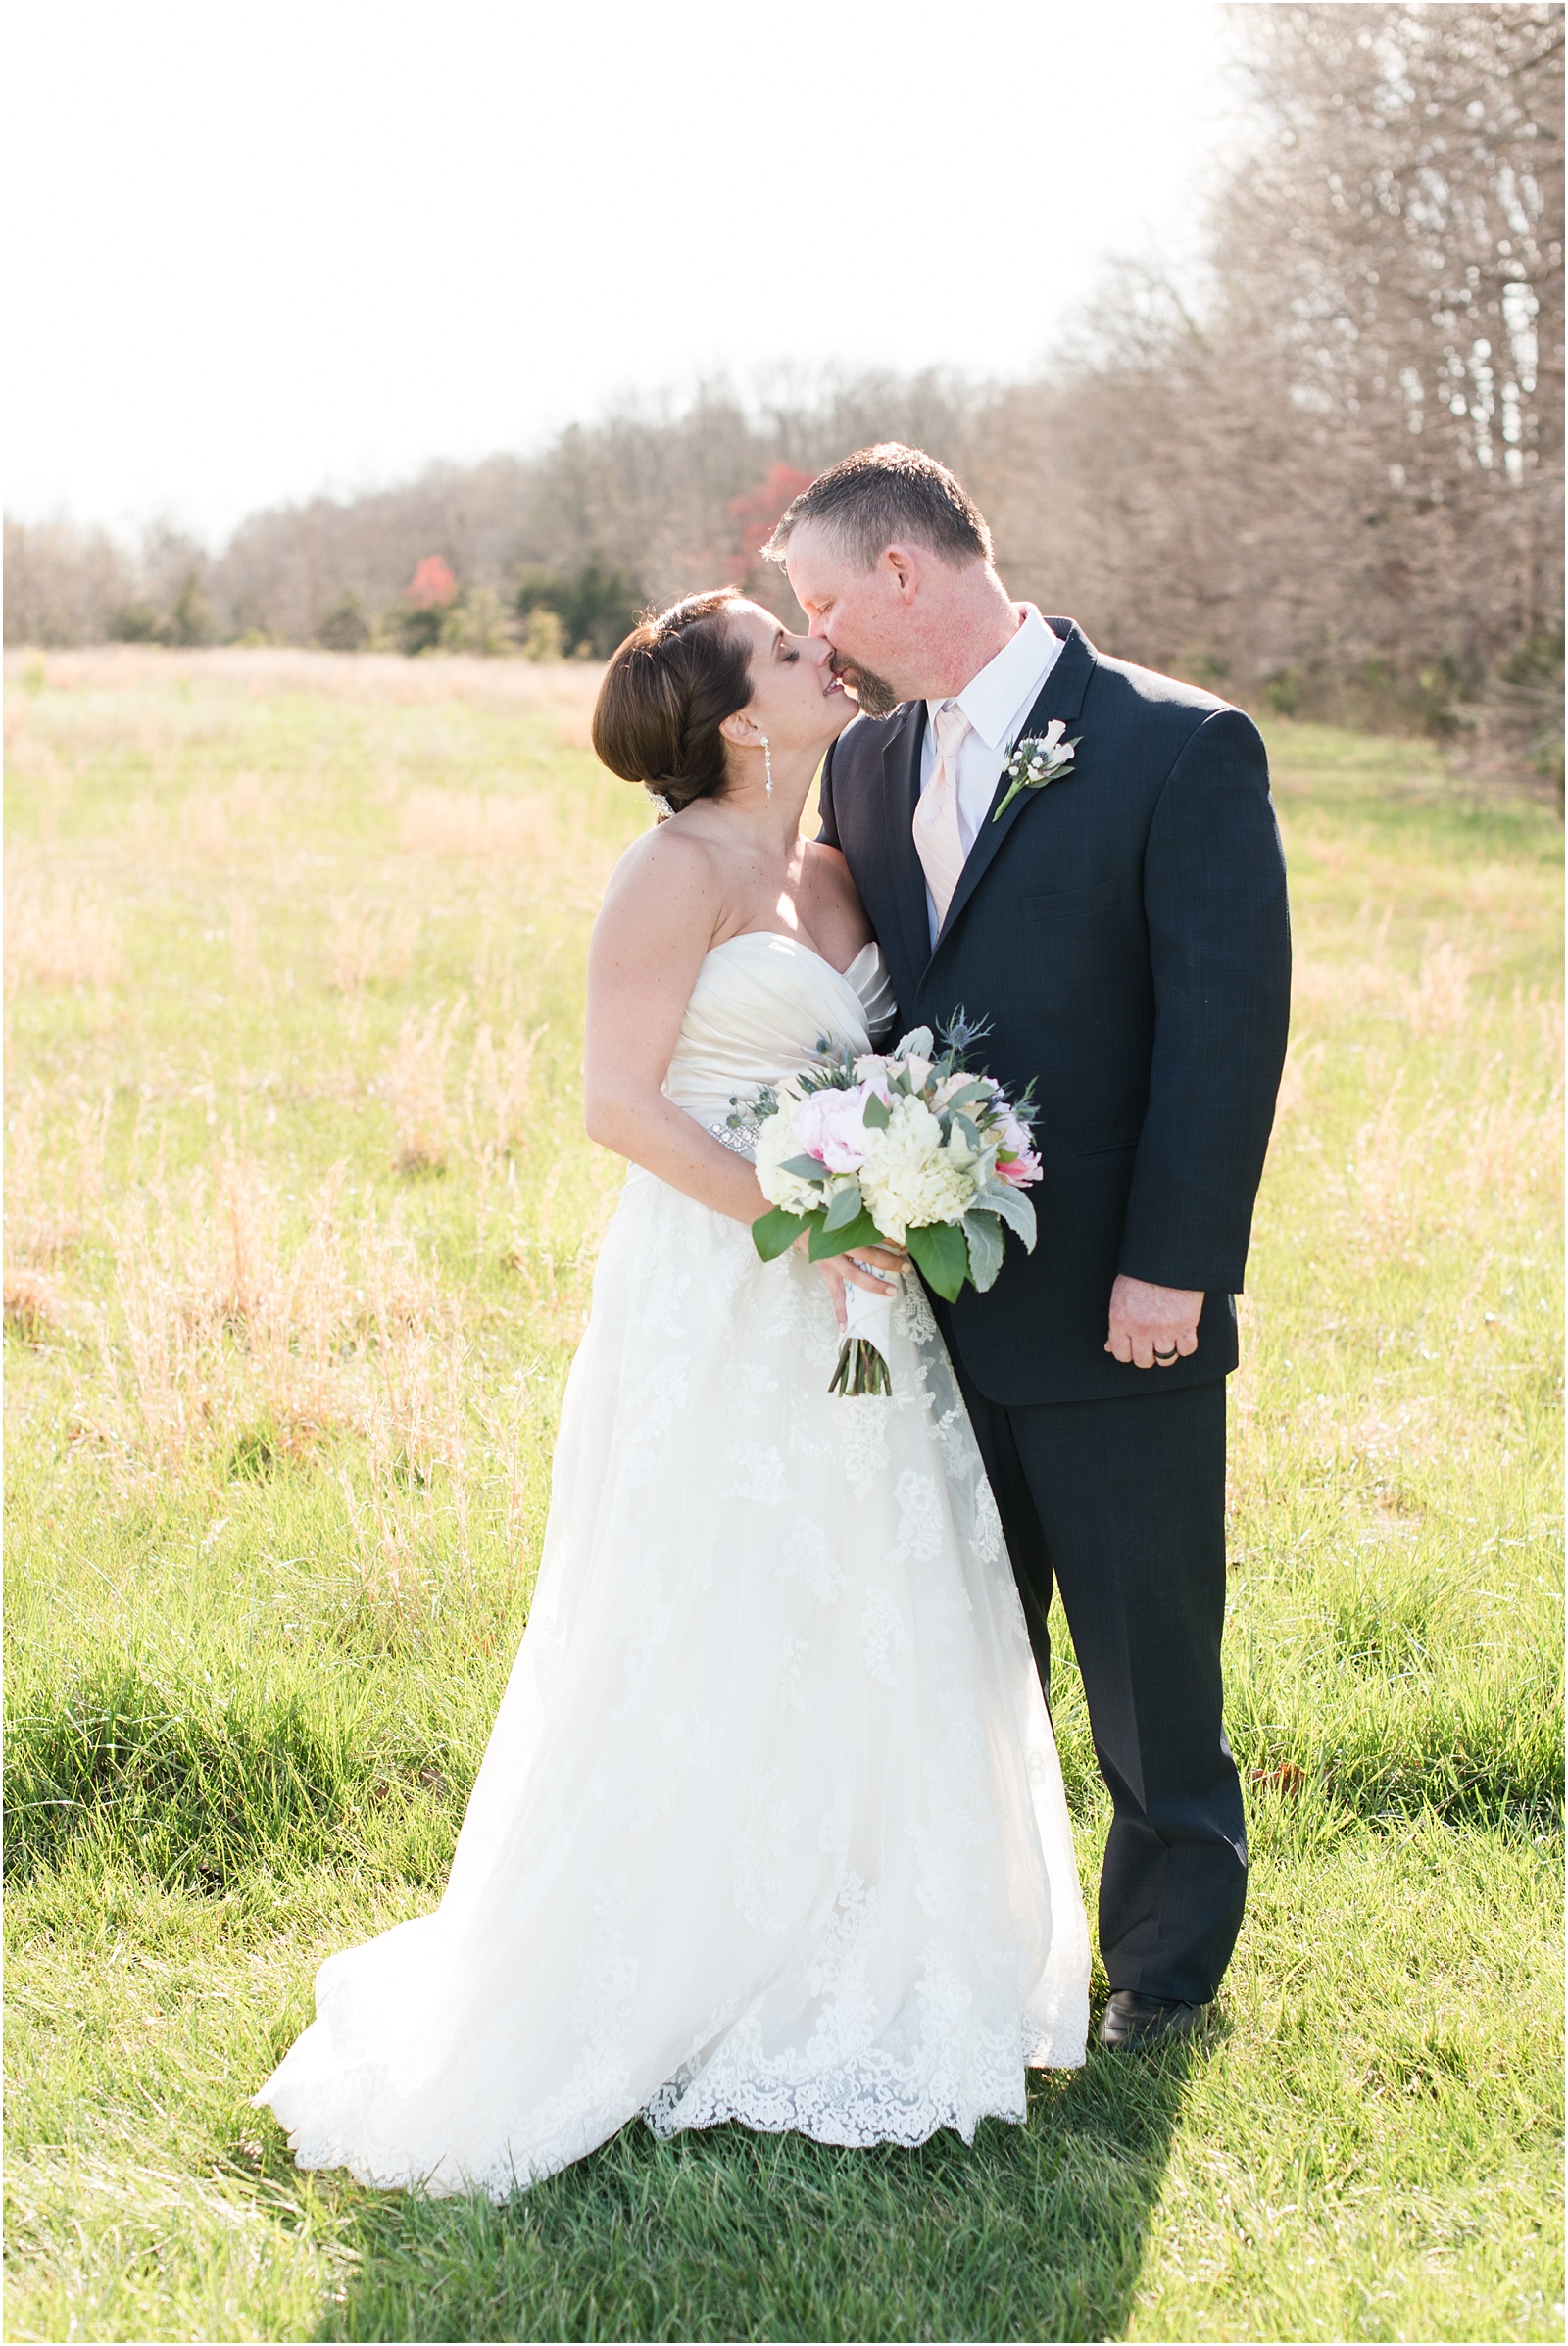 A Country Chic Starlight Meadows Wedding, Burlington NC, Outdoor wedding, wedding rings, wedding invitation suite, groom details, blush wedding bouquet, vintage couch, gray vintage couch